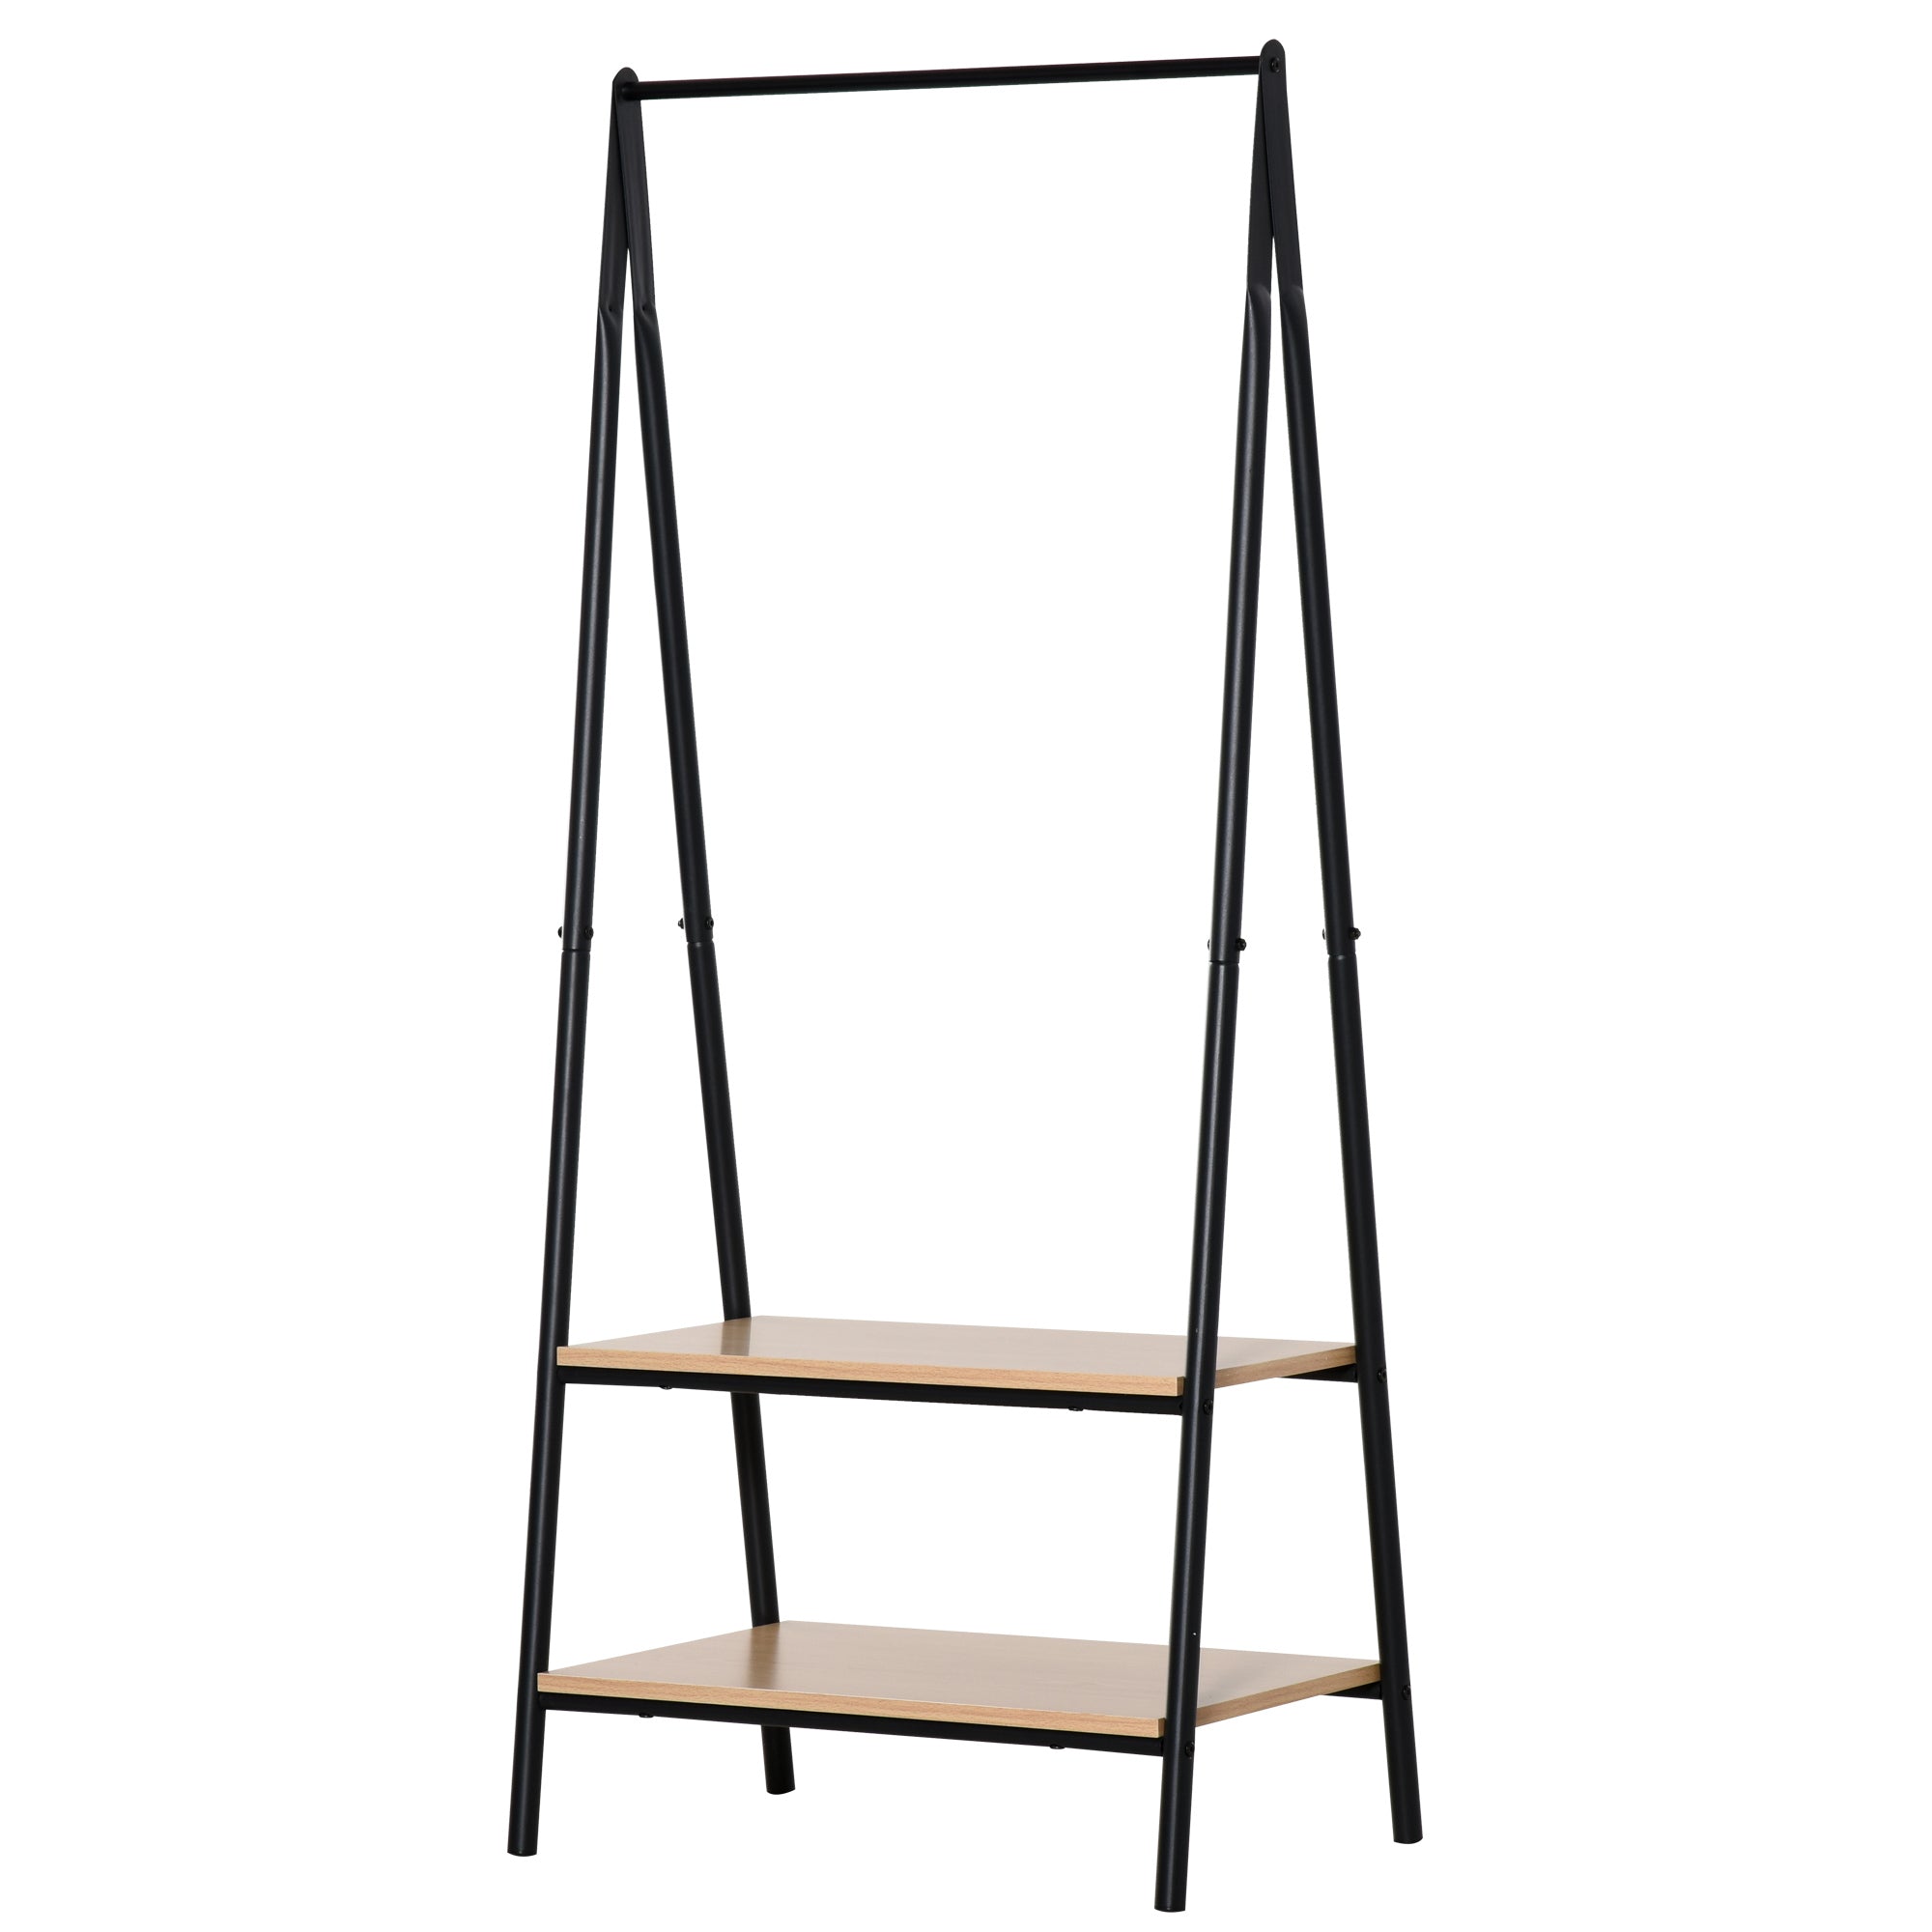 Clothes Rail, Freestanding Metal Clothes Rack with 2 Tier Storage Shelves for Bedroom and Entryway, 64 x 42.5 x 149 cm, Black Frame-0